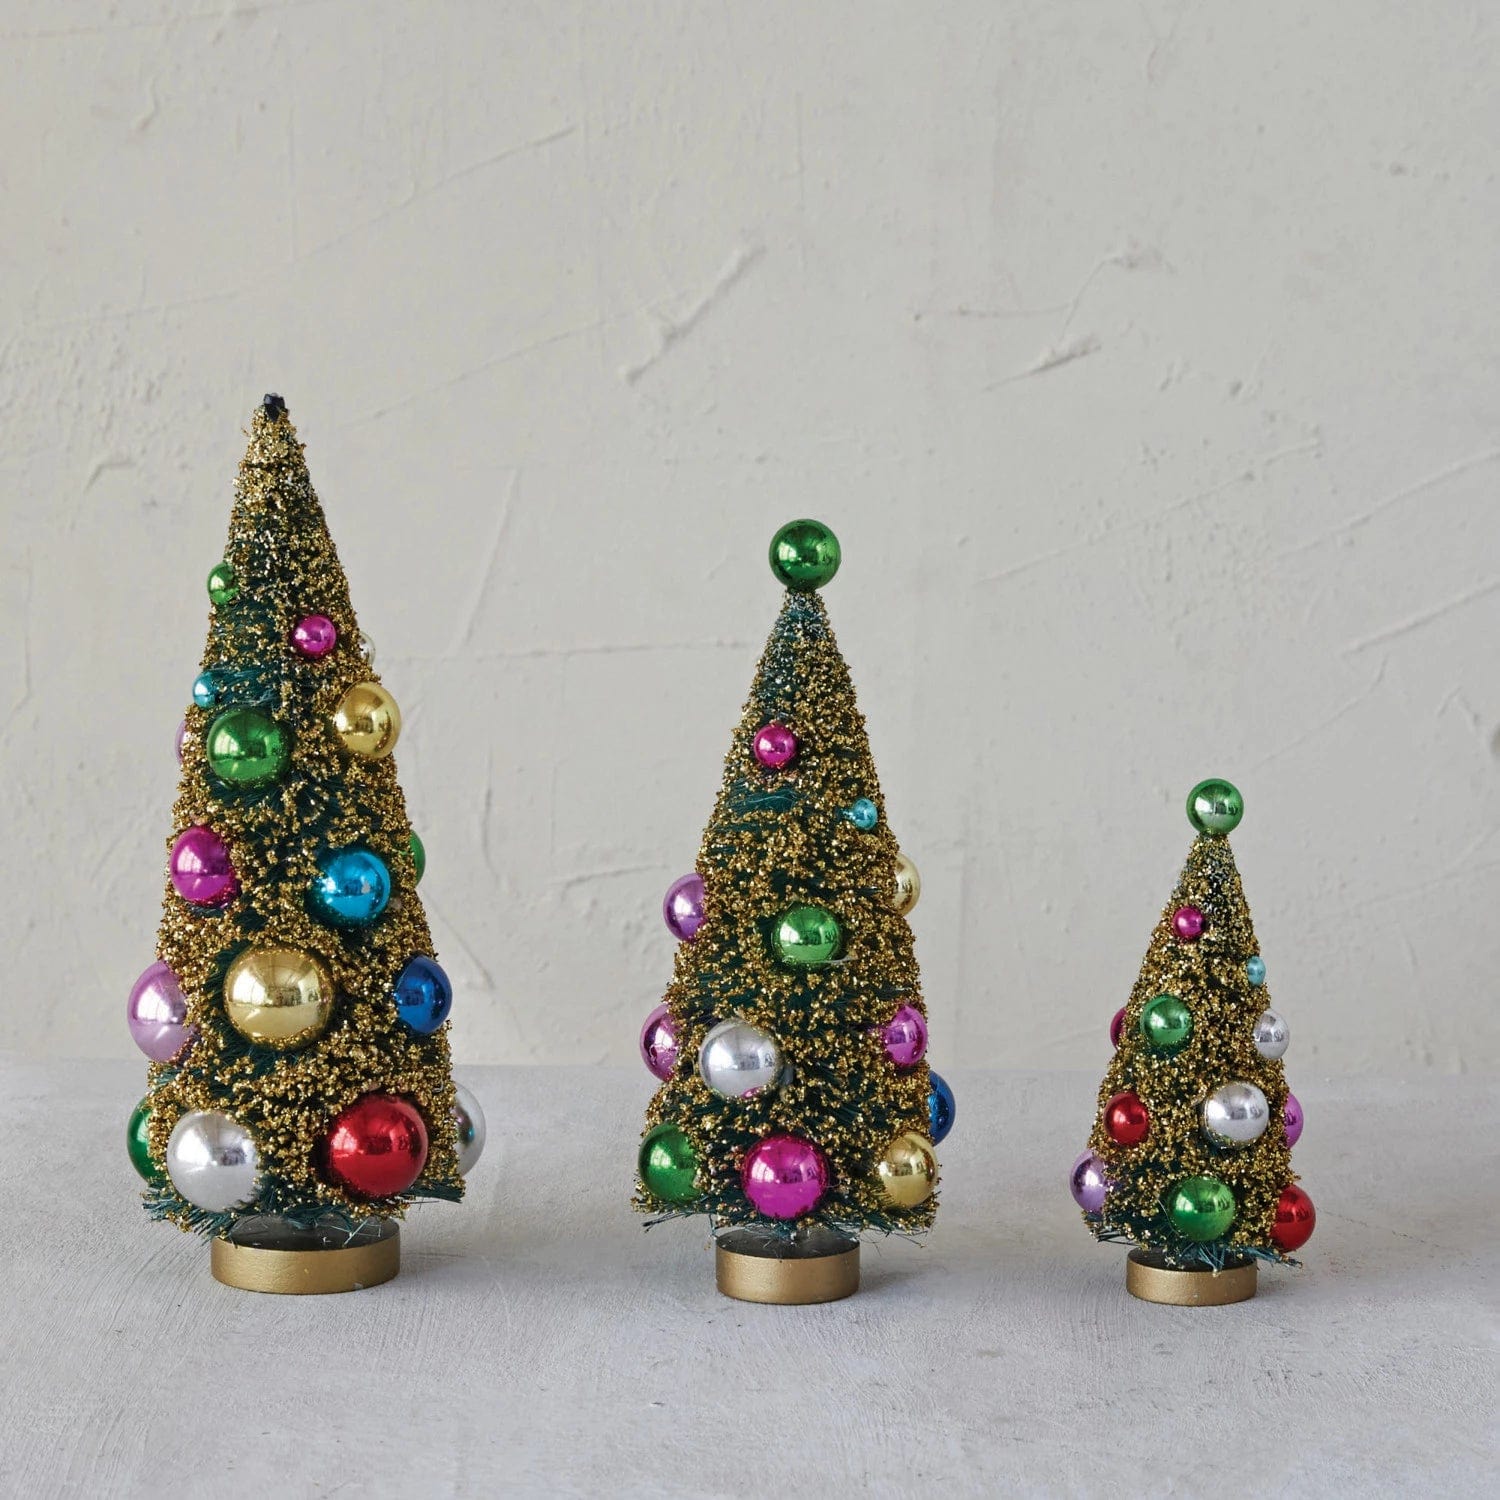 Creative Co-Op Creative Co-op Sisal Bottle Brush Trees with Ornaments - Little Miss Muffin Children & Home